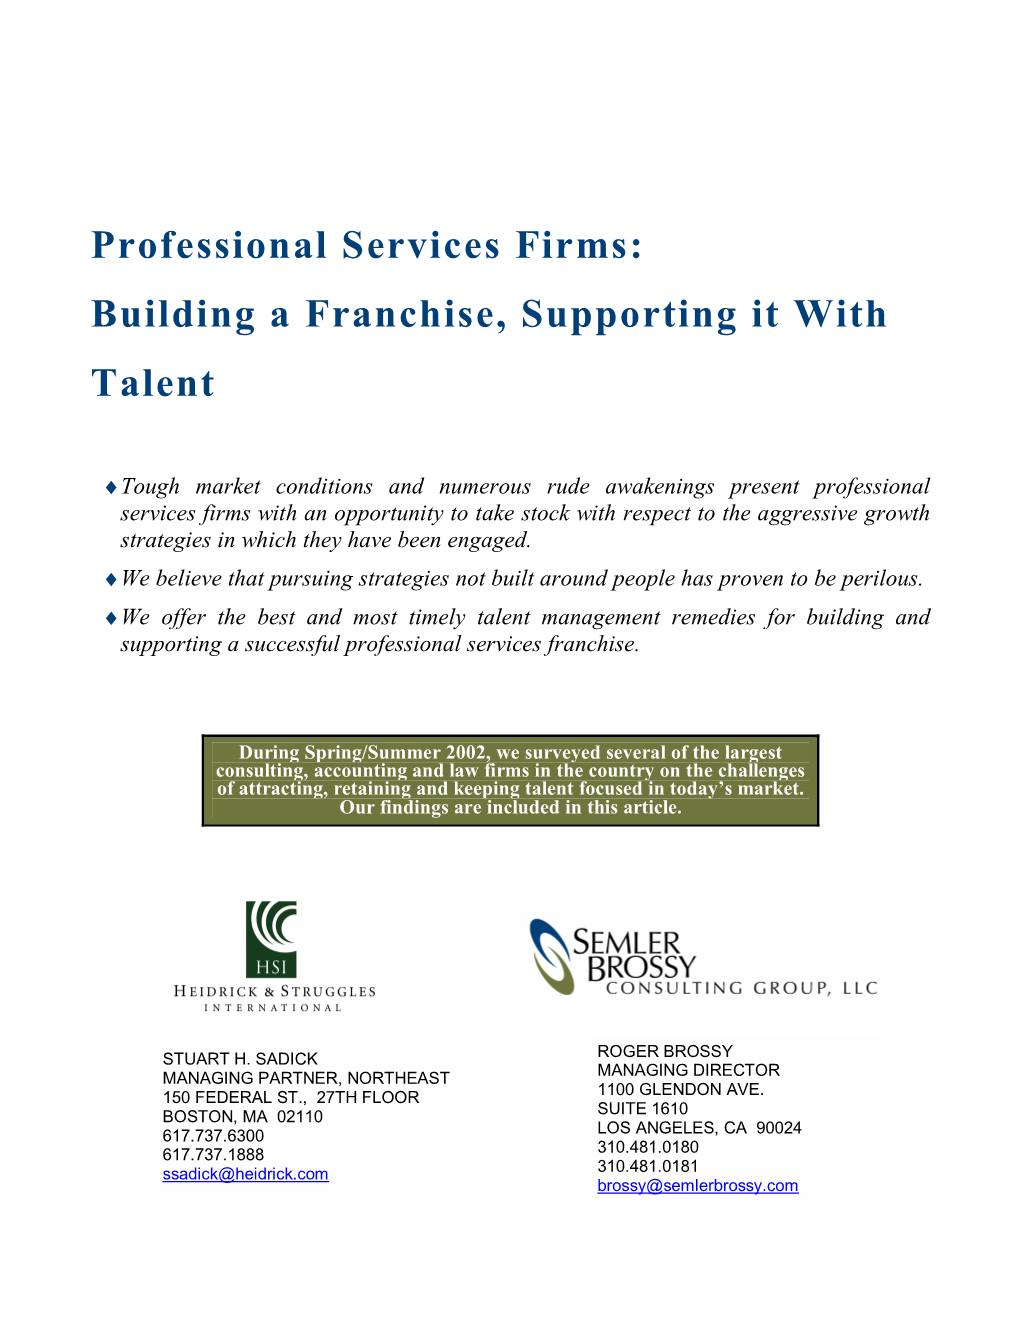 Professional Services Firms: Building a Franchise, Supporting It with Talent